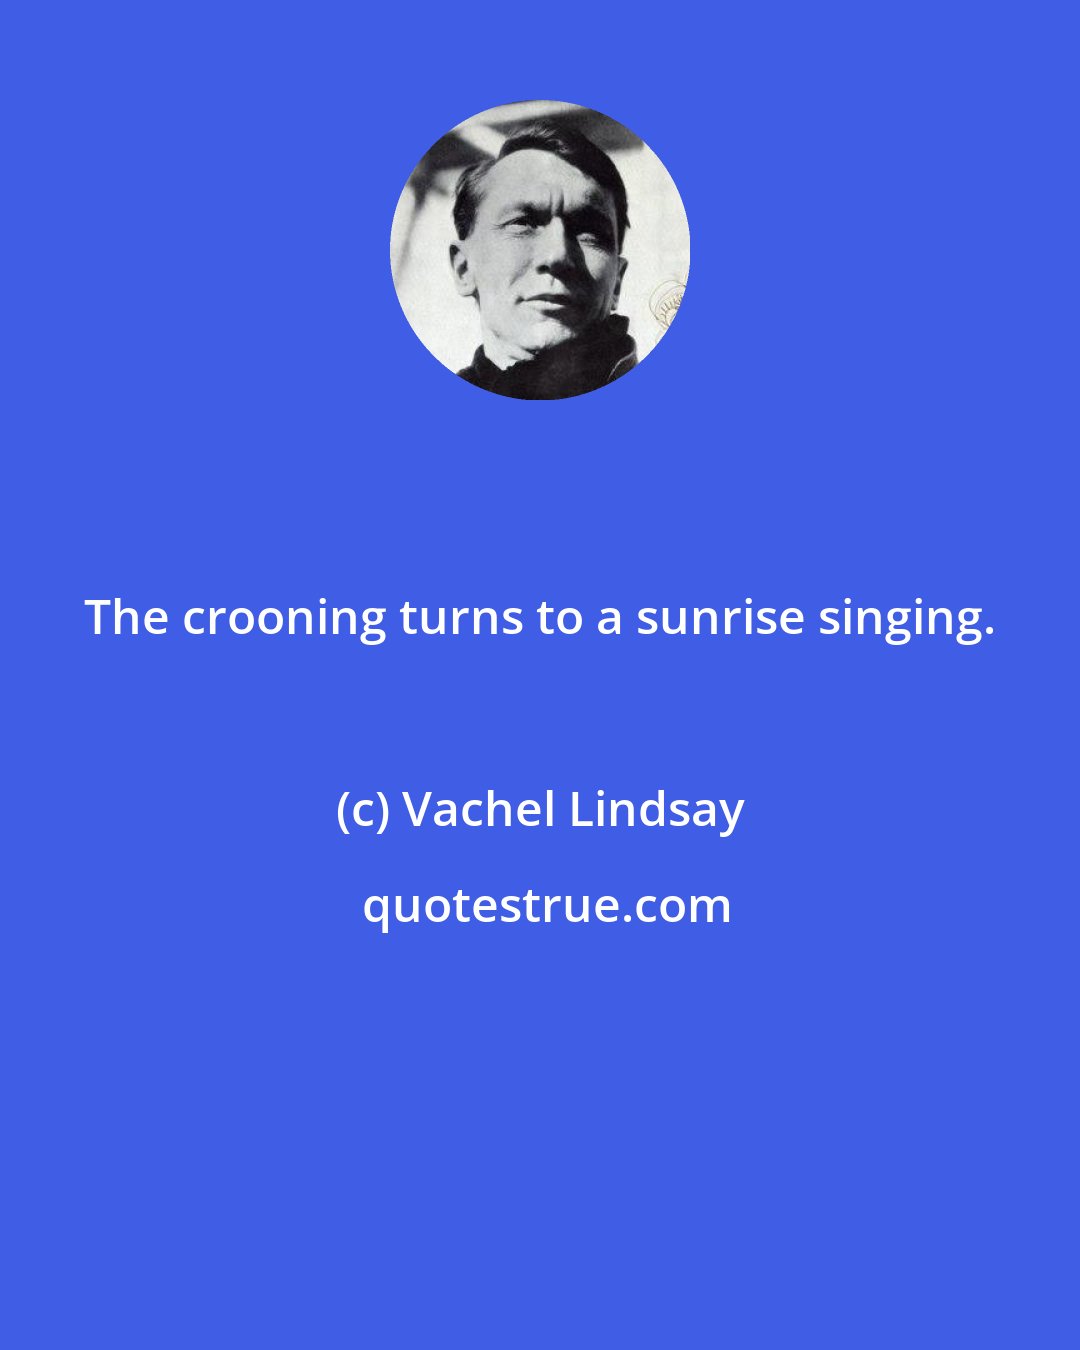 Vachel Lindsay: The crooning turns to a sunrise singing.